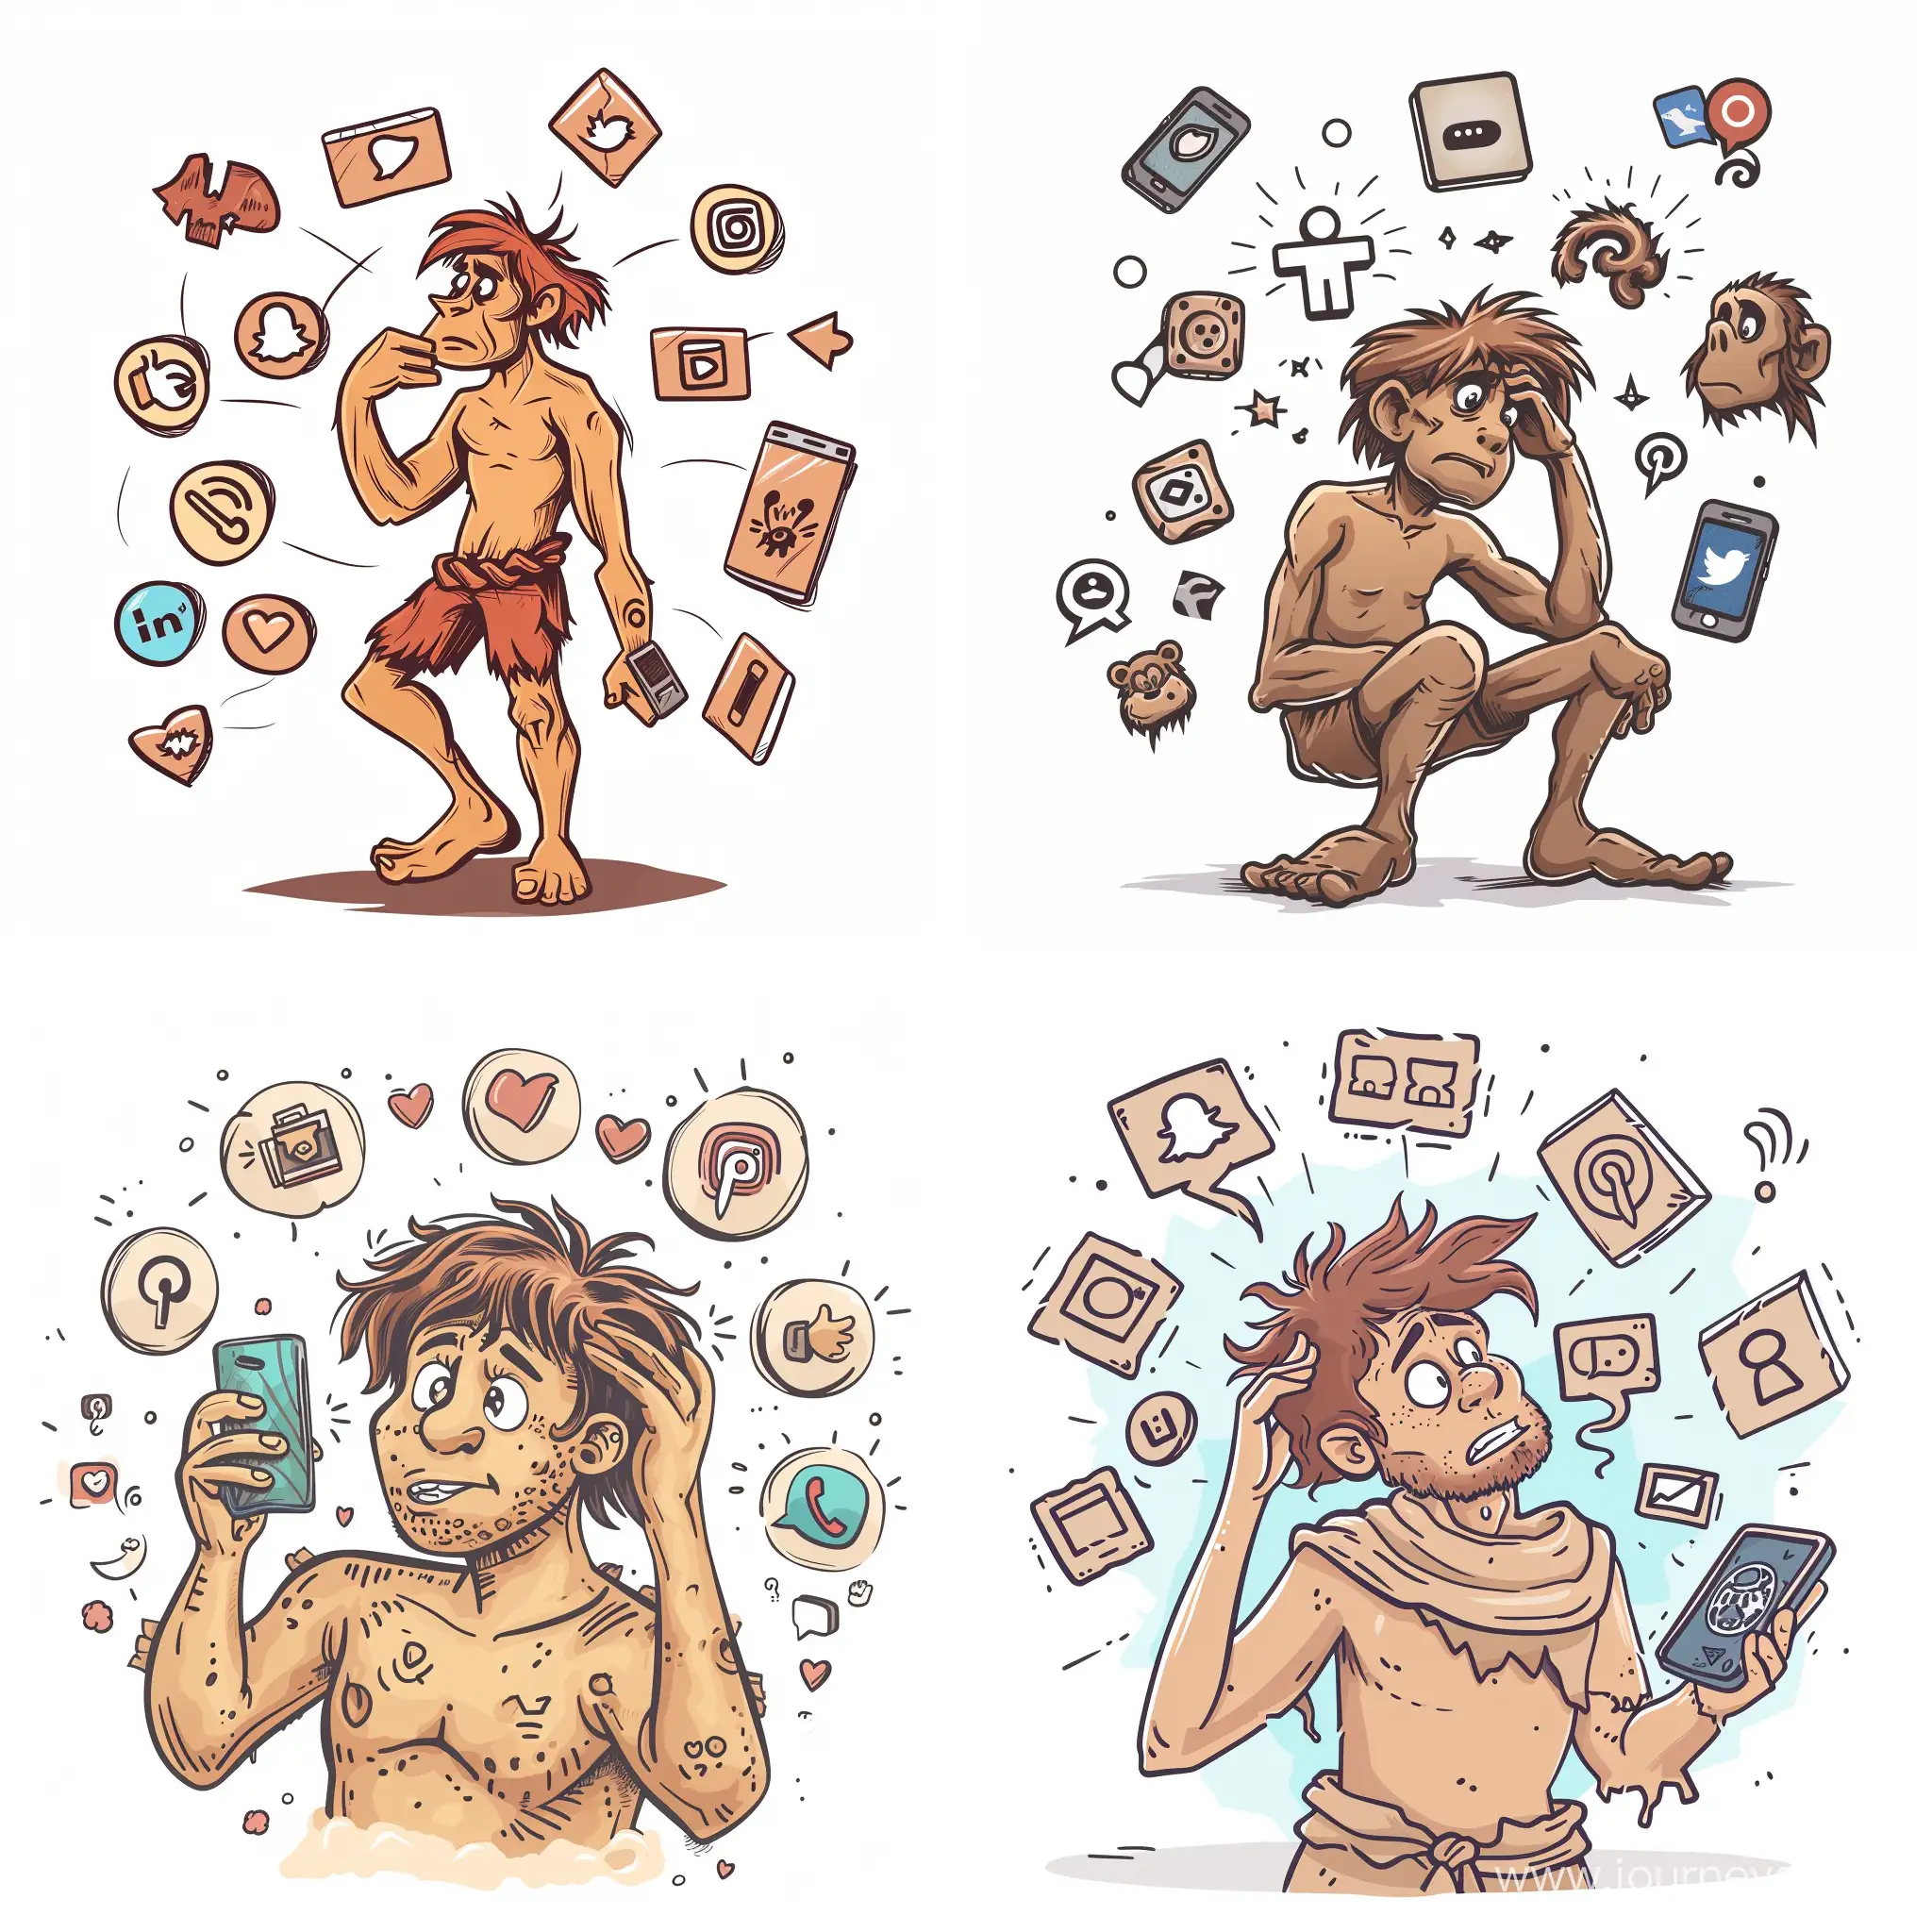 Stone-Age-Man-Contemplates-Modern-Technology-with-Mobile-Phone-and-Social-Media-Icons